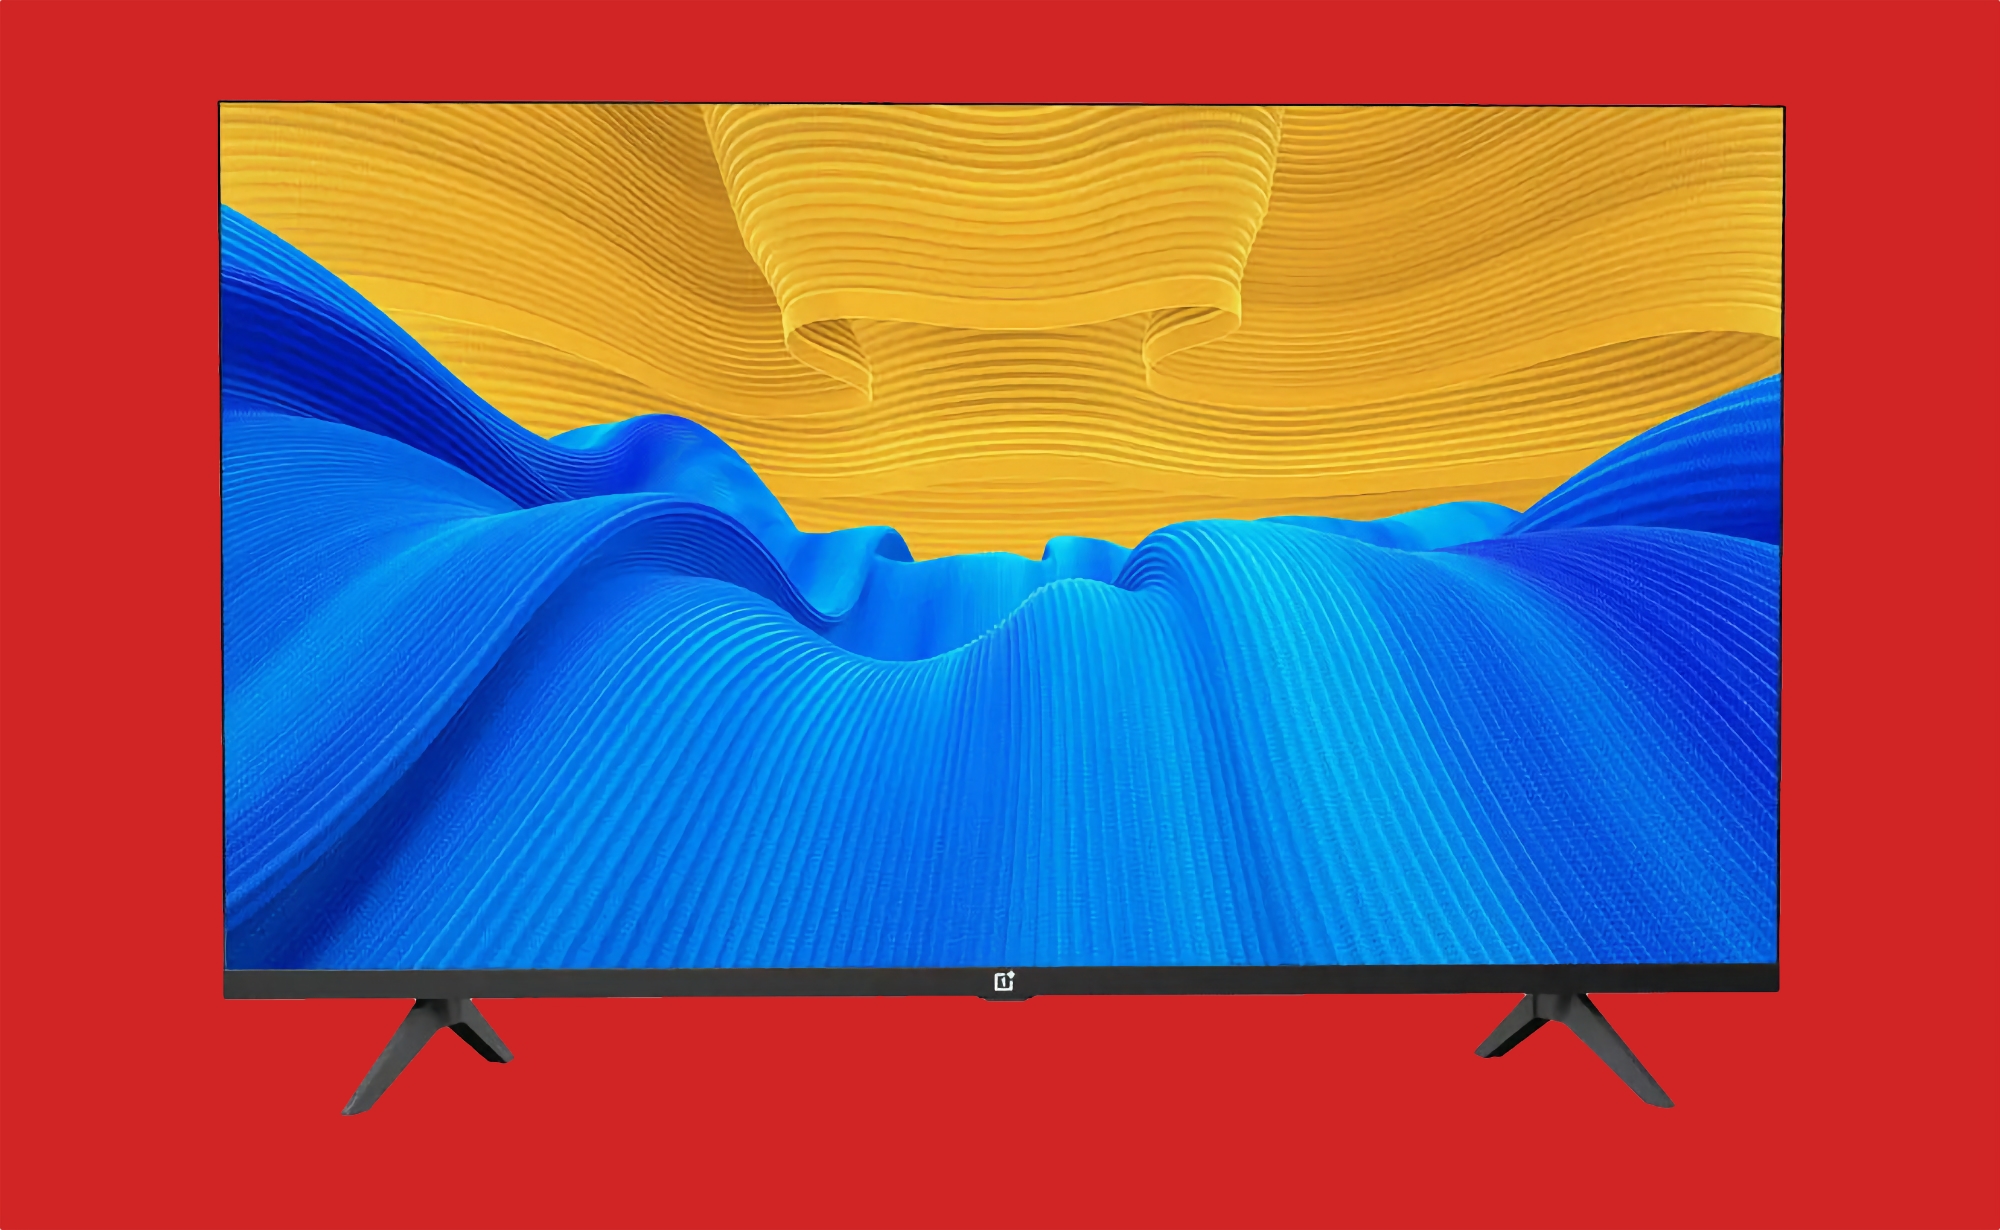 OnePlus TV Y1S: 40-inch smart TV with FHD screen, HDR support and MediaTek chip for $268